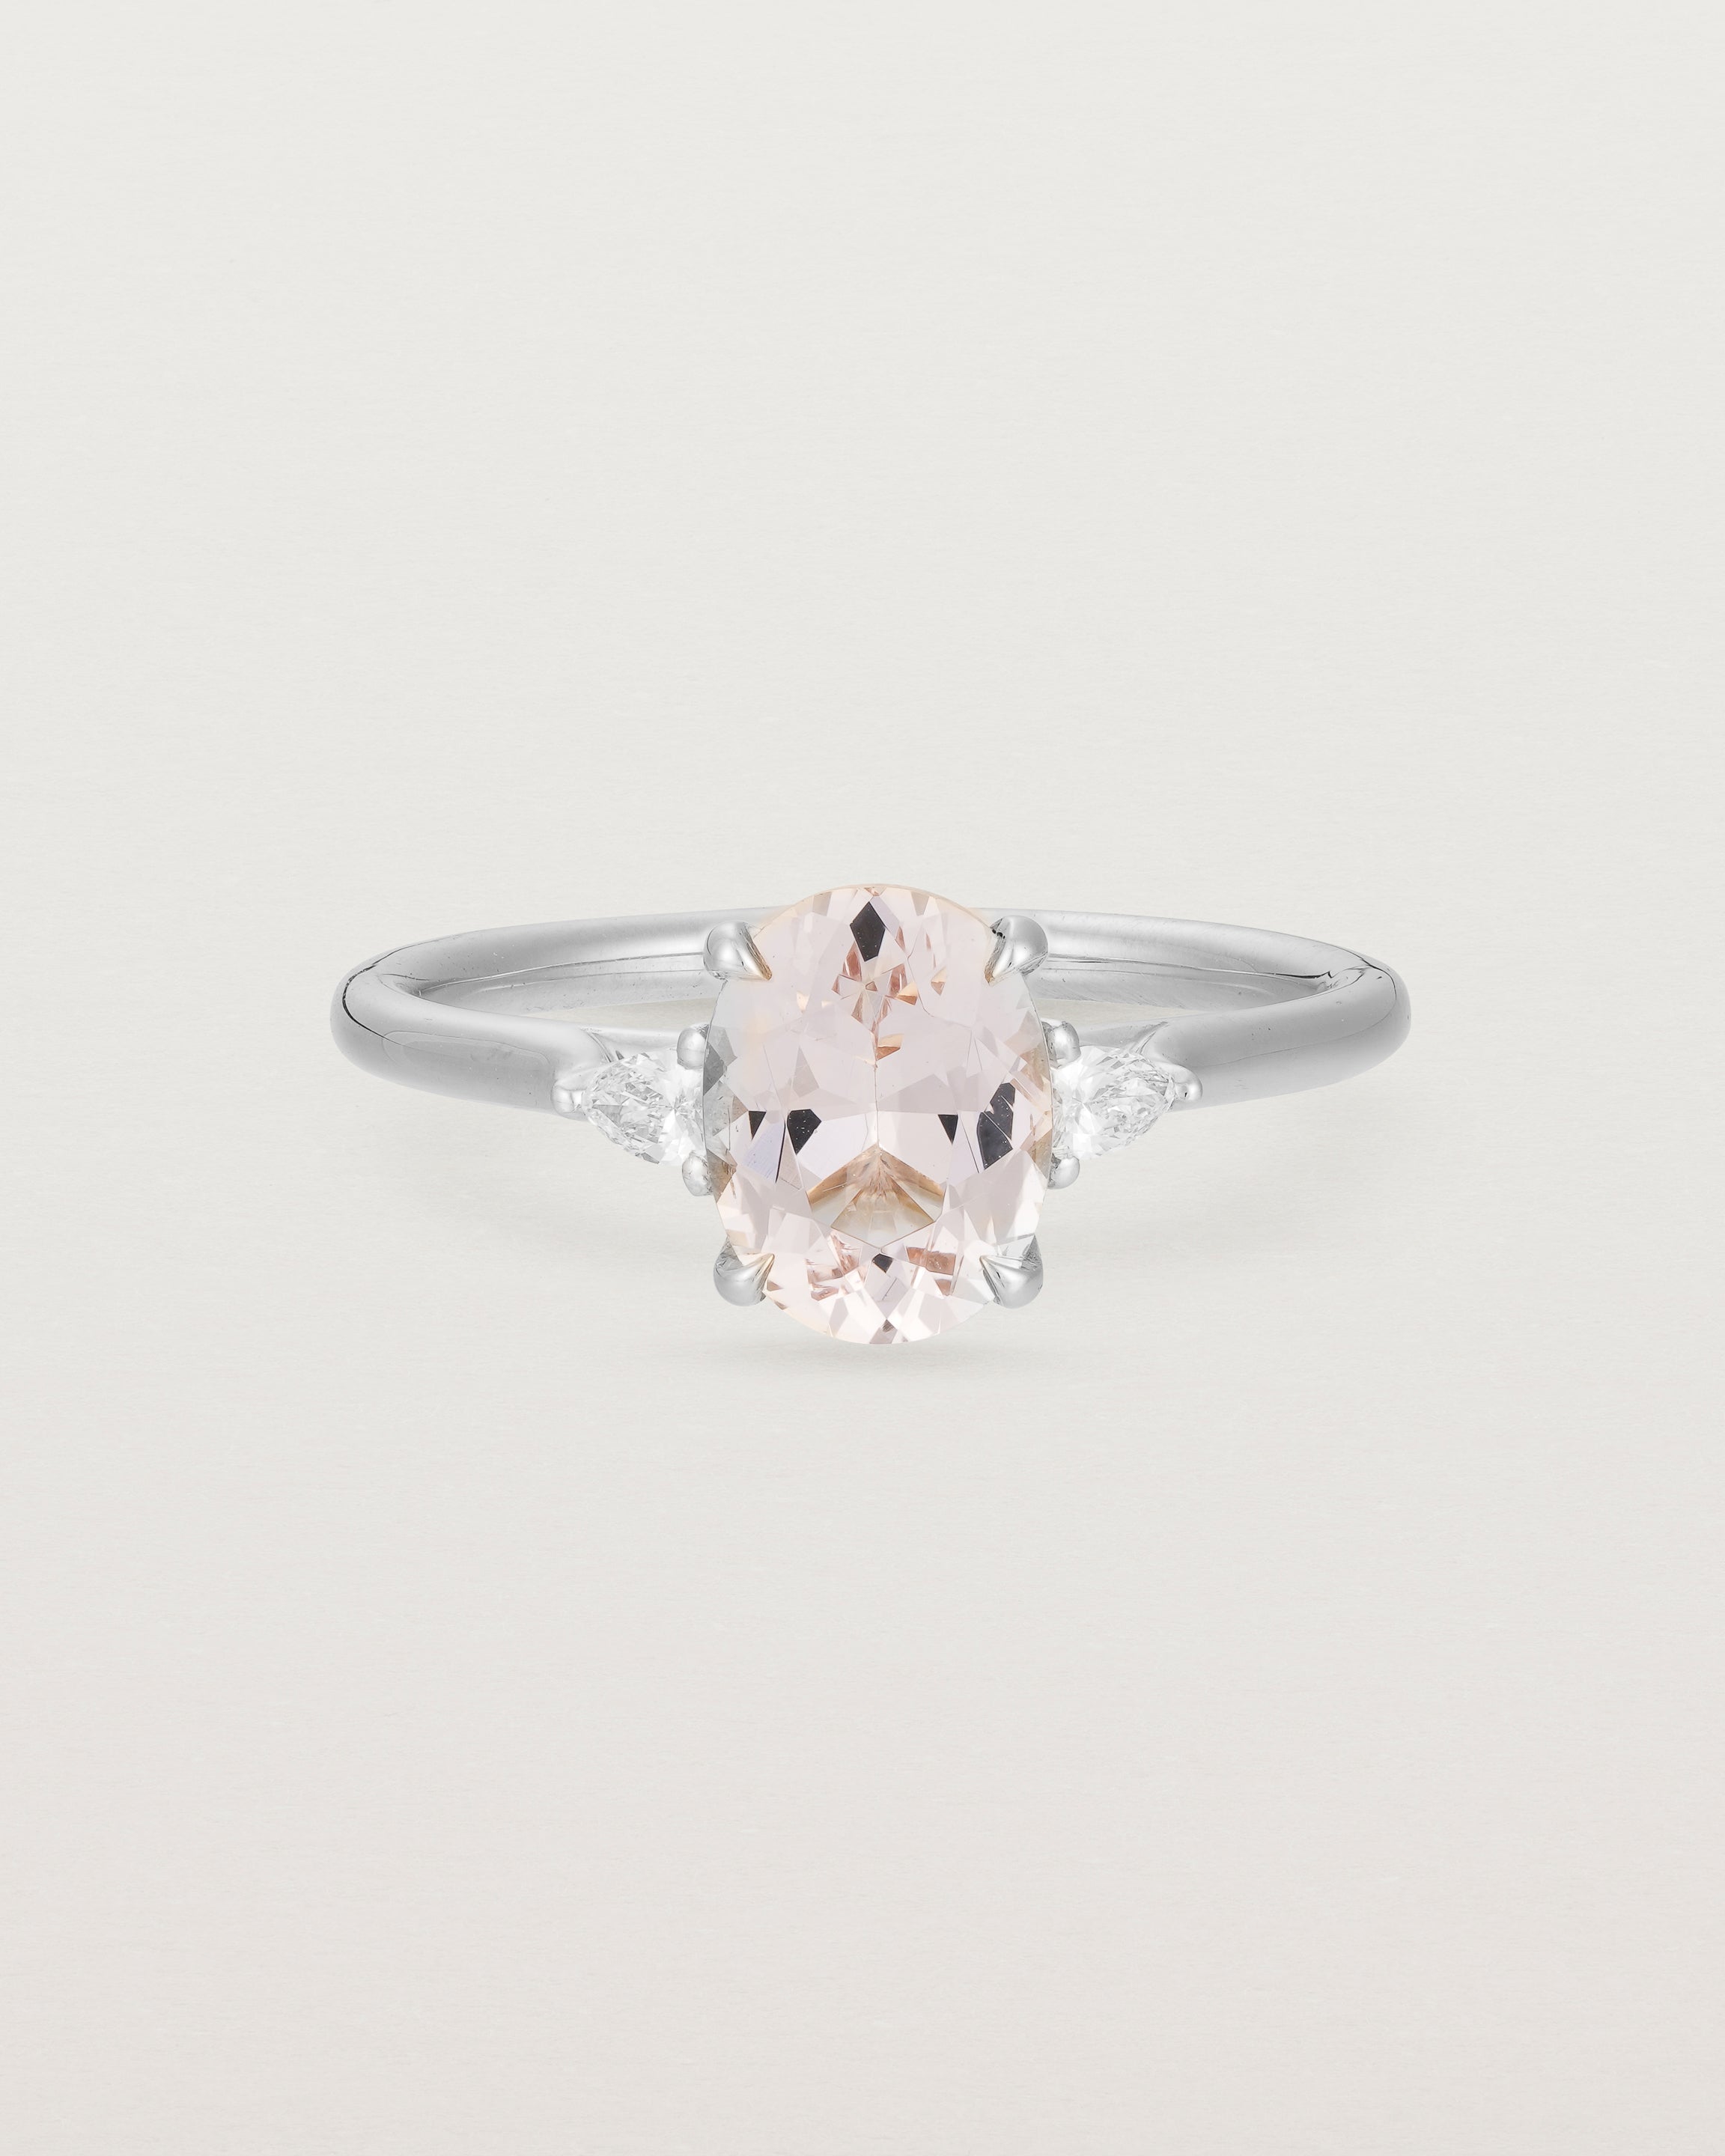 An oval morganite adorned with two white diamonds either side, featuring a sweeping setting and crafted in white gold